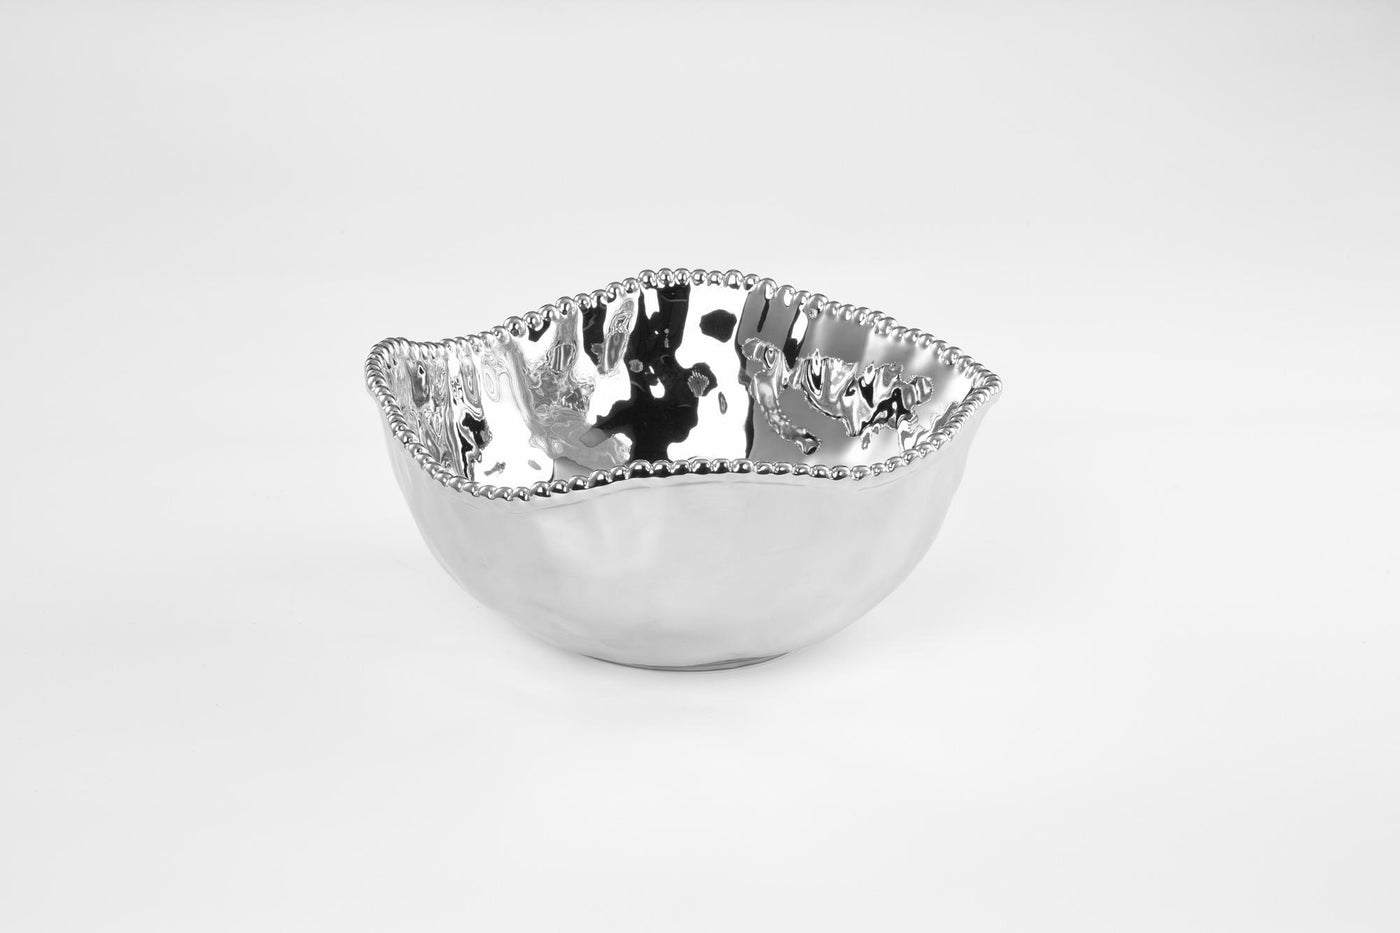 Silver Large Salad Bowl (1 Count)